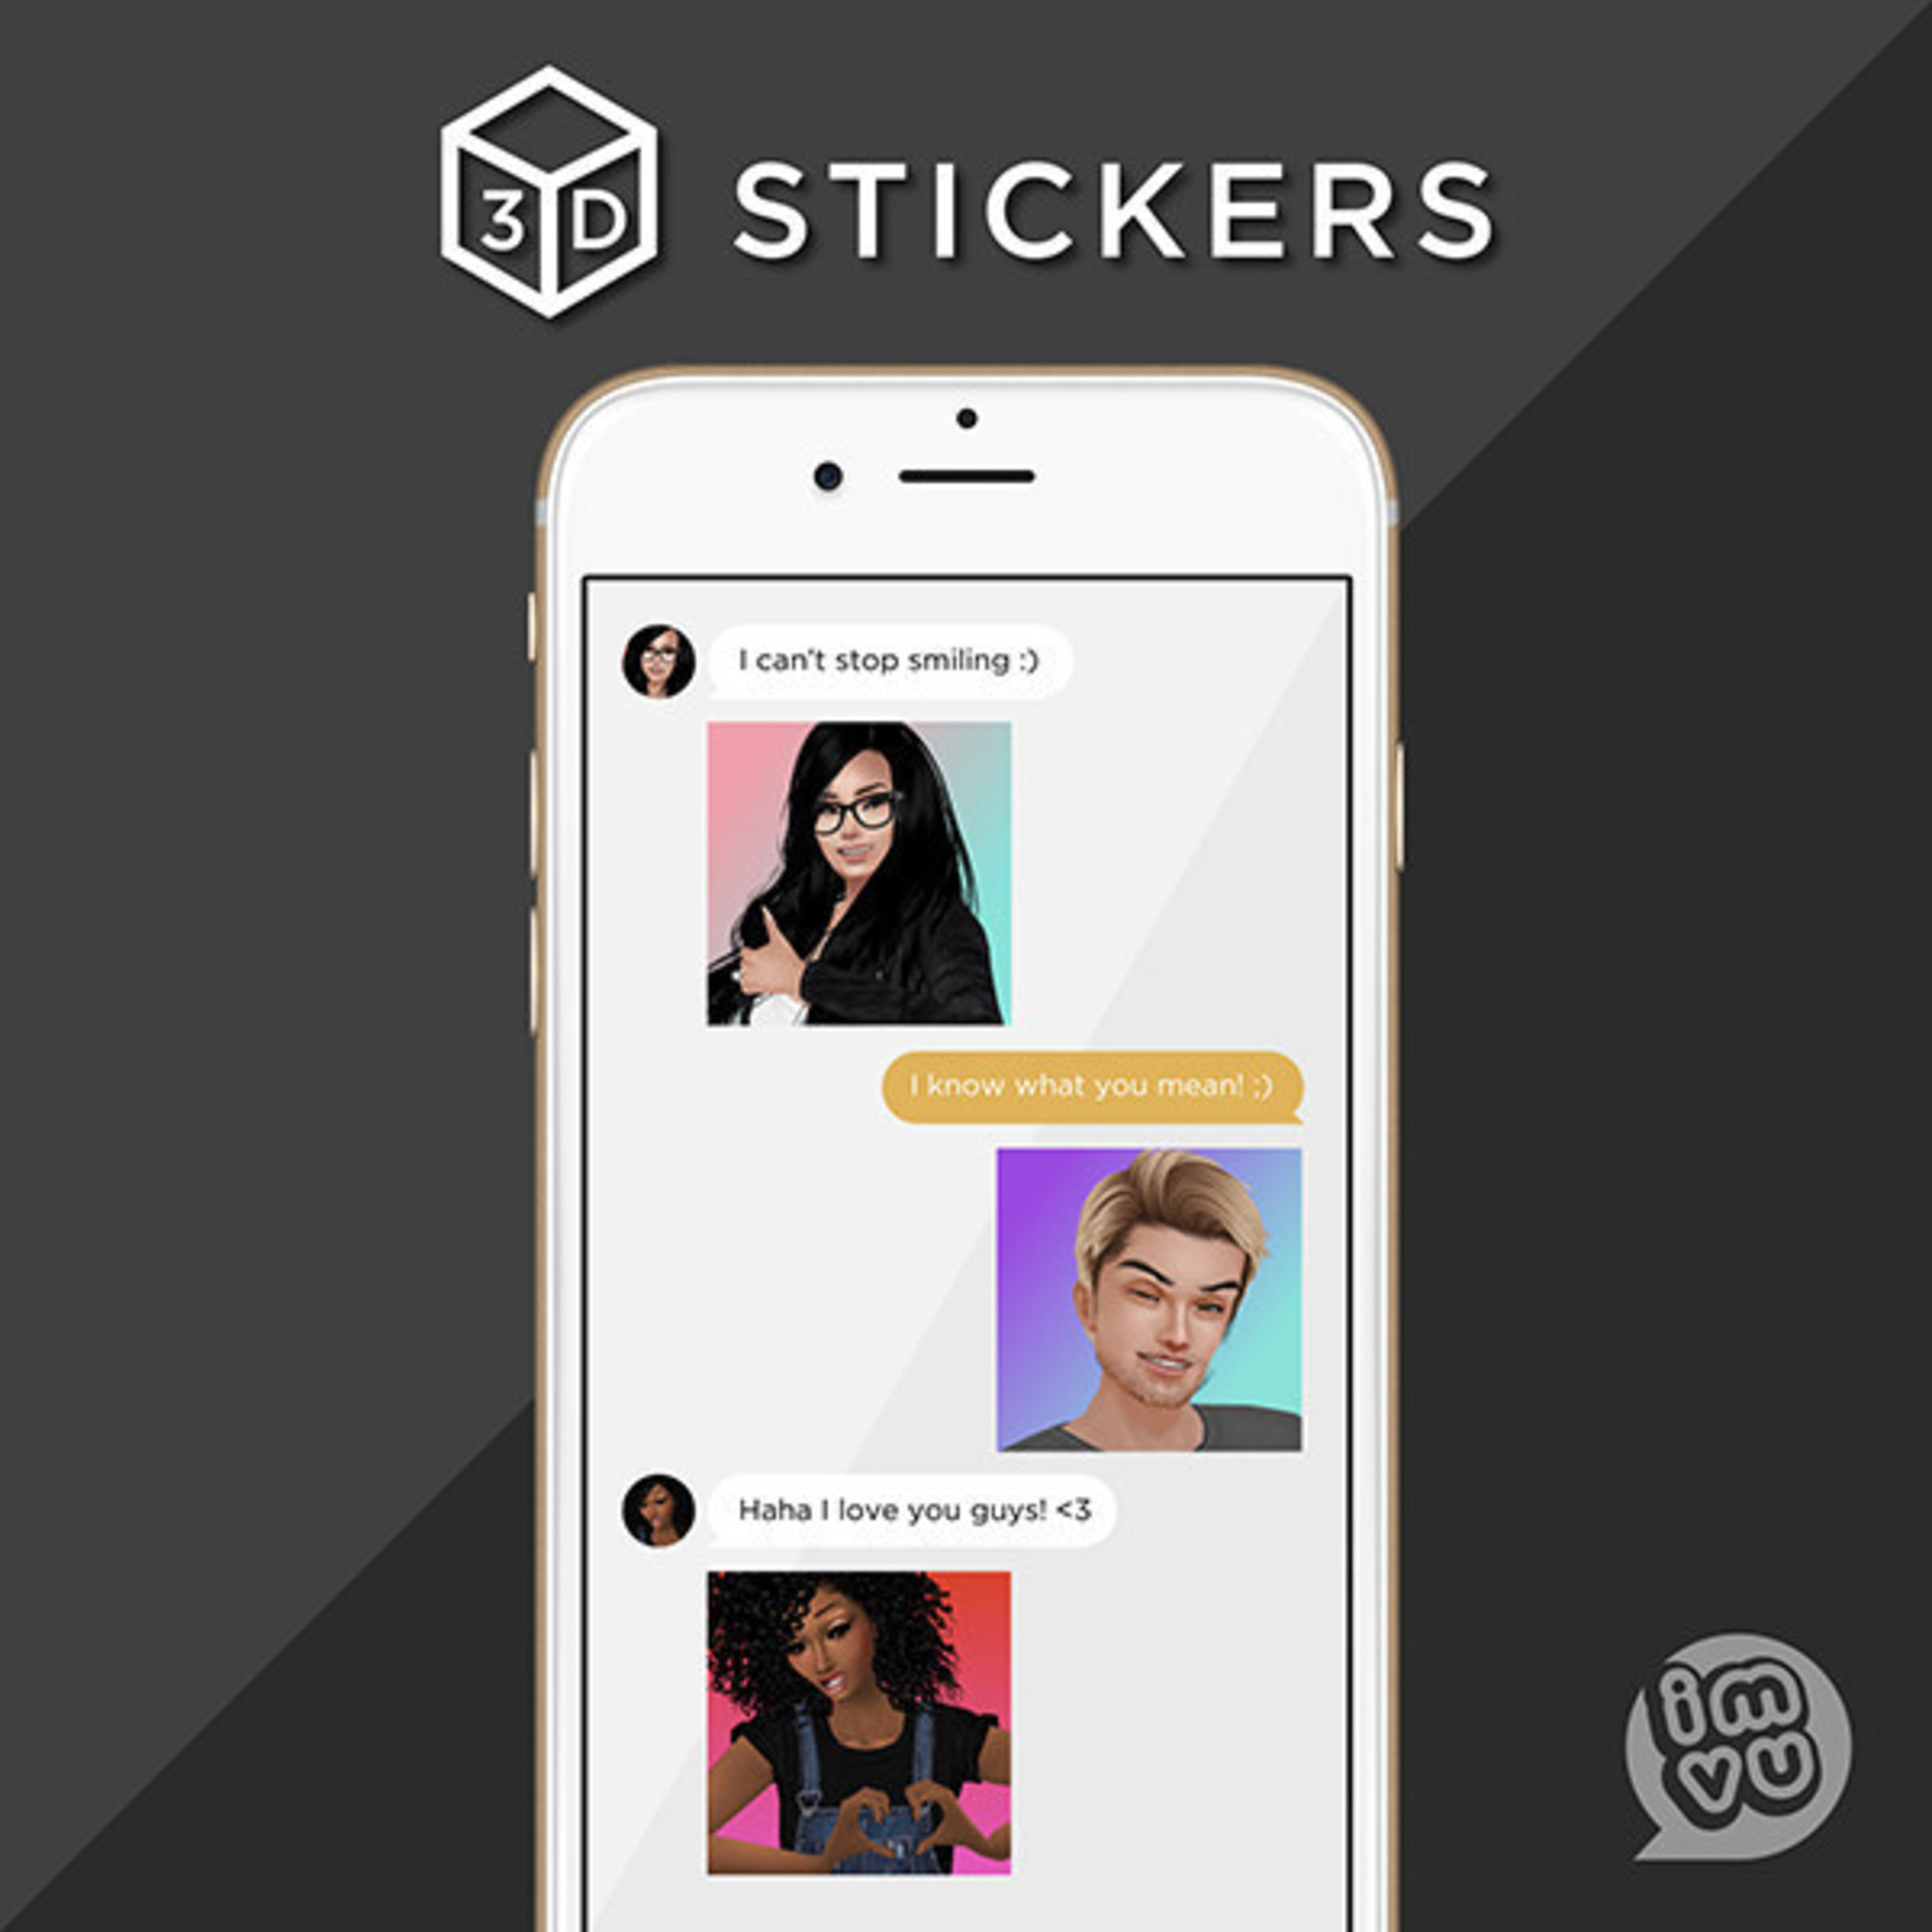 IMVU 3D Stickers use your personalized avatar to bring your conversation to life. Emotion in motion.